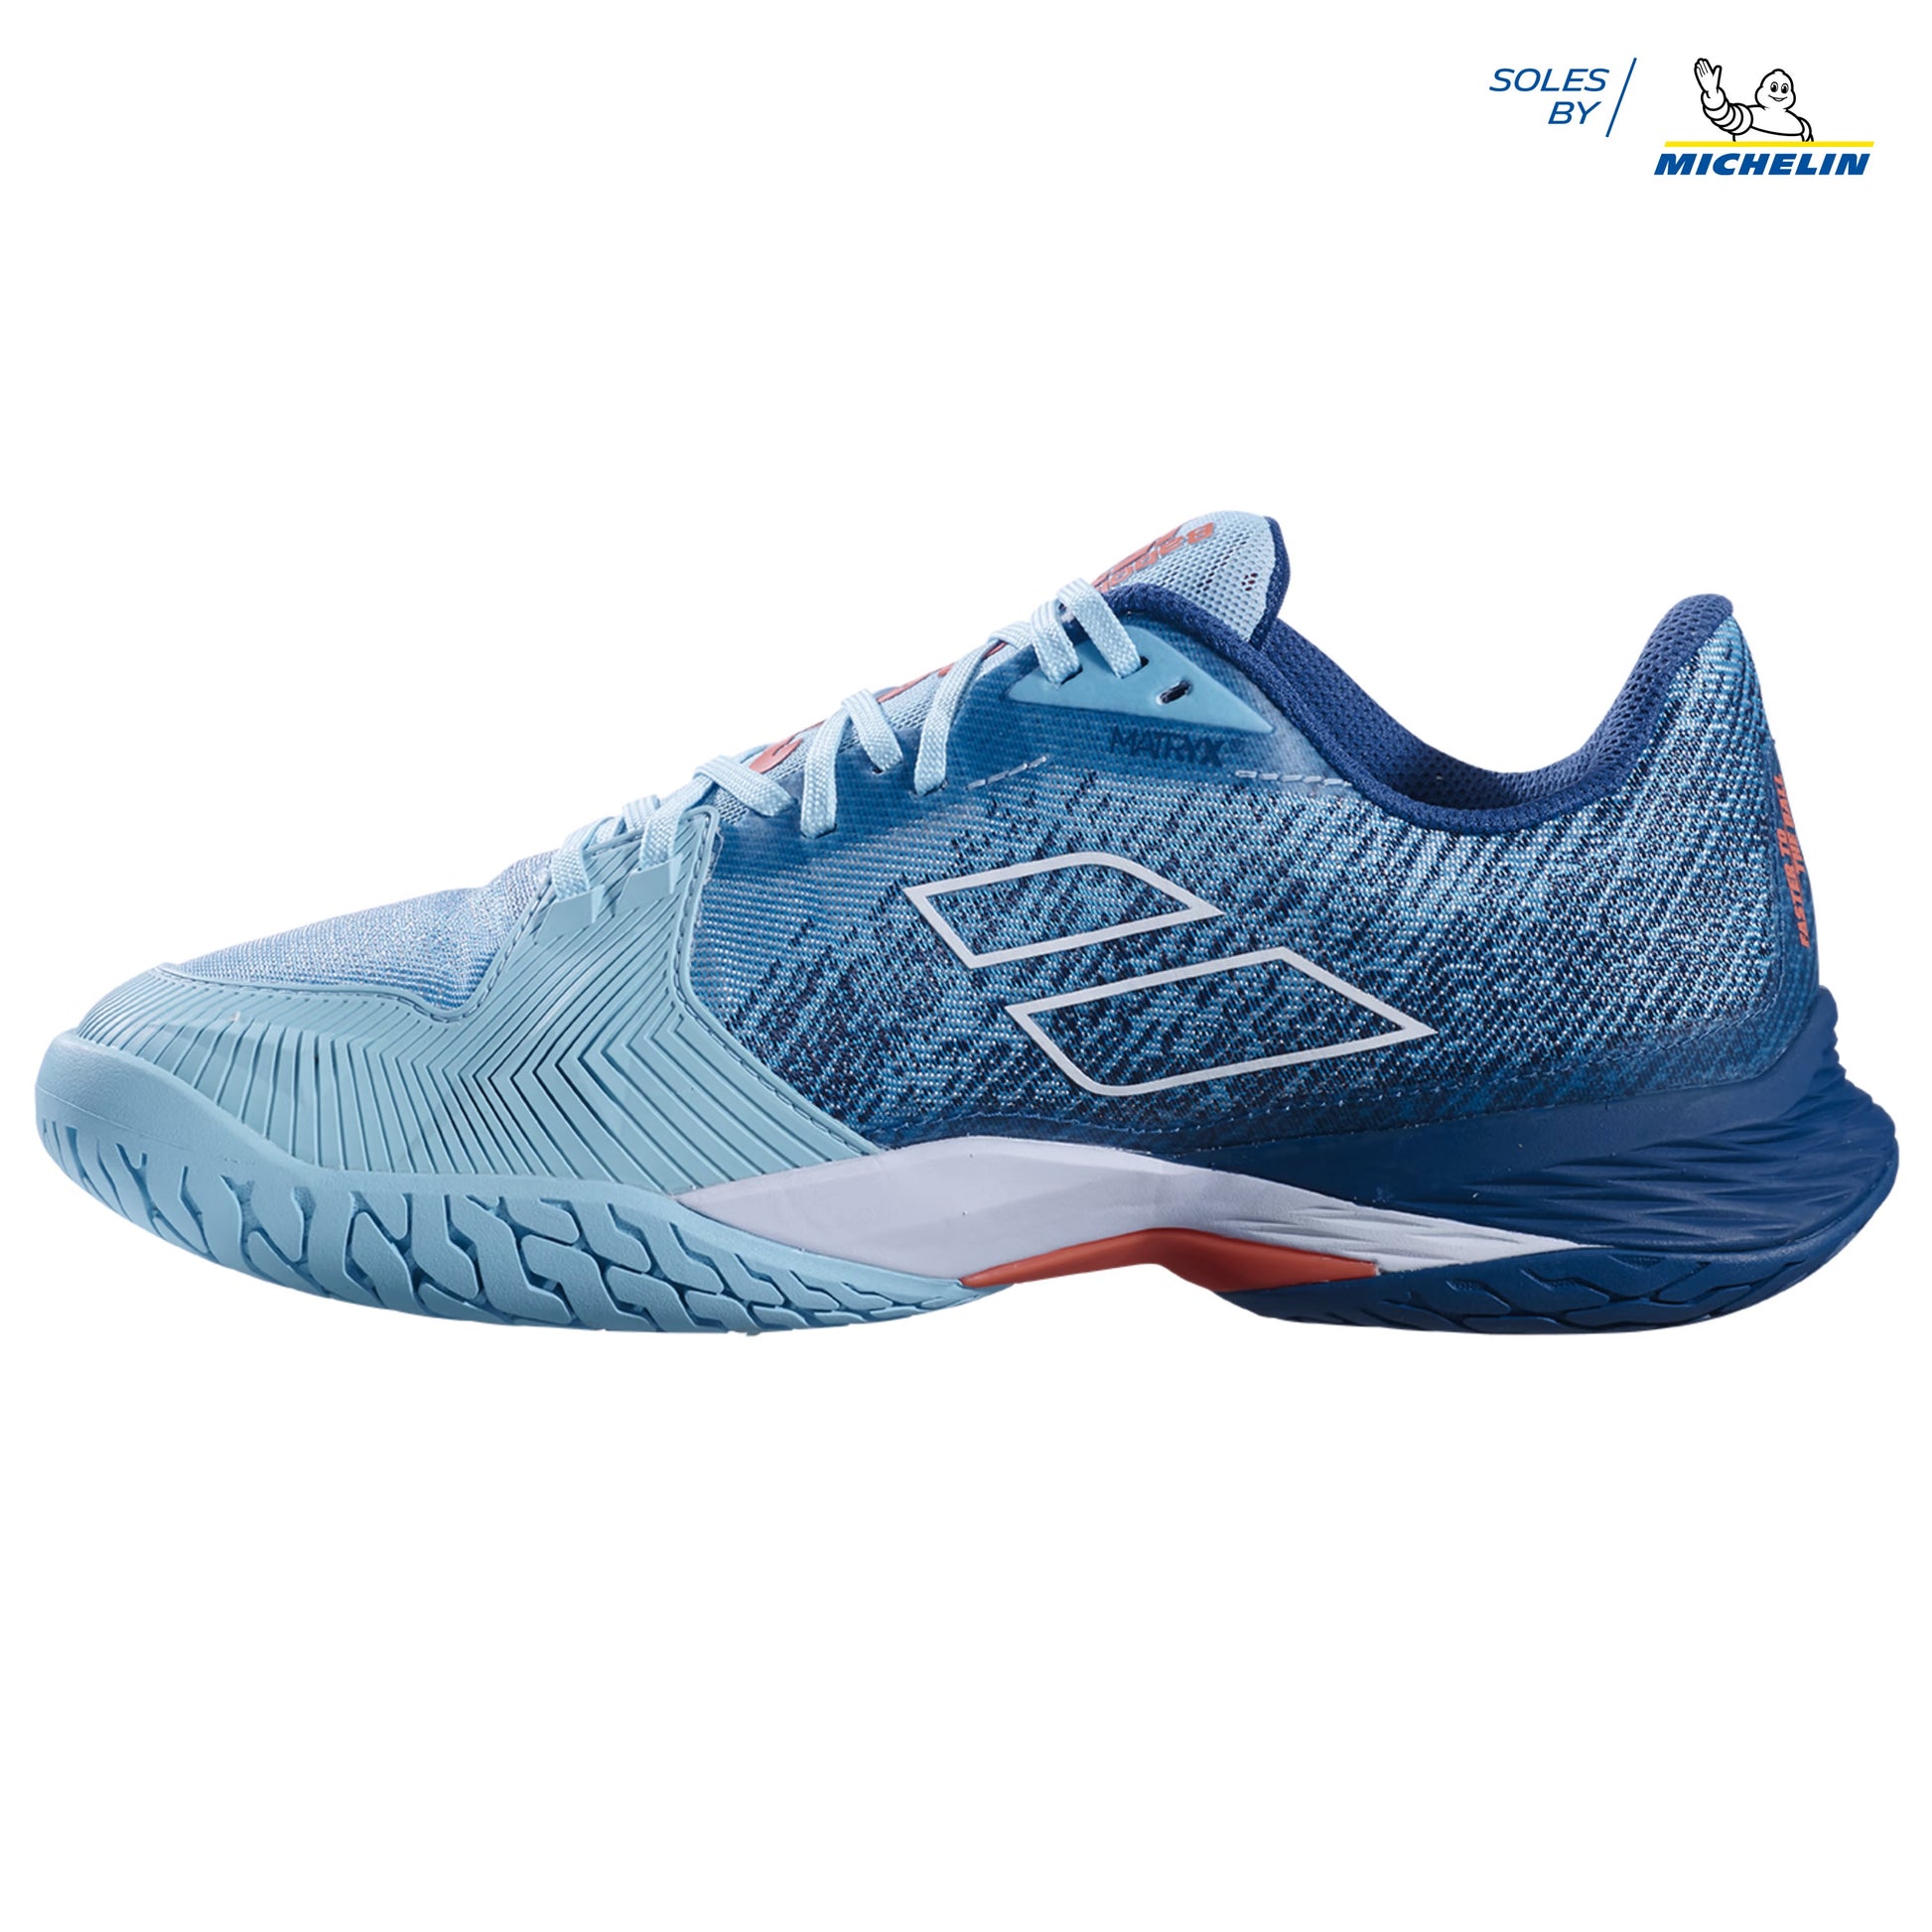 Babolat SFX3 All Court Men's Shoe is Wide, Lightweight and So Comfortable